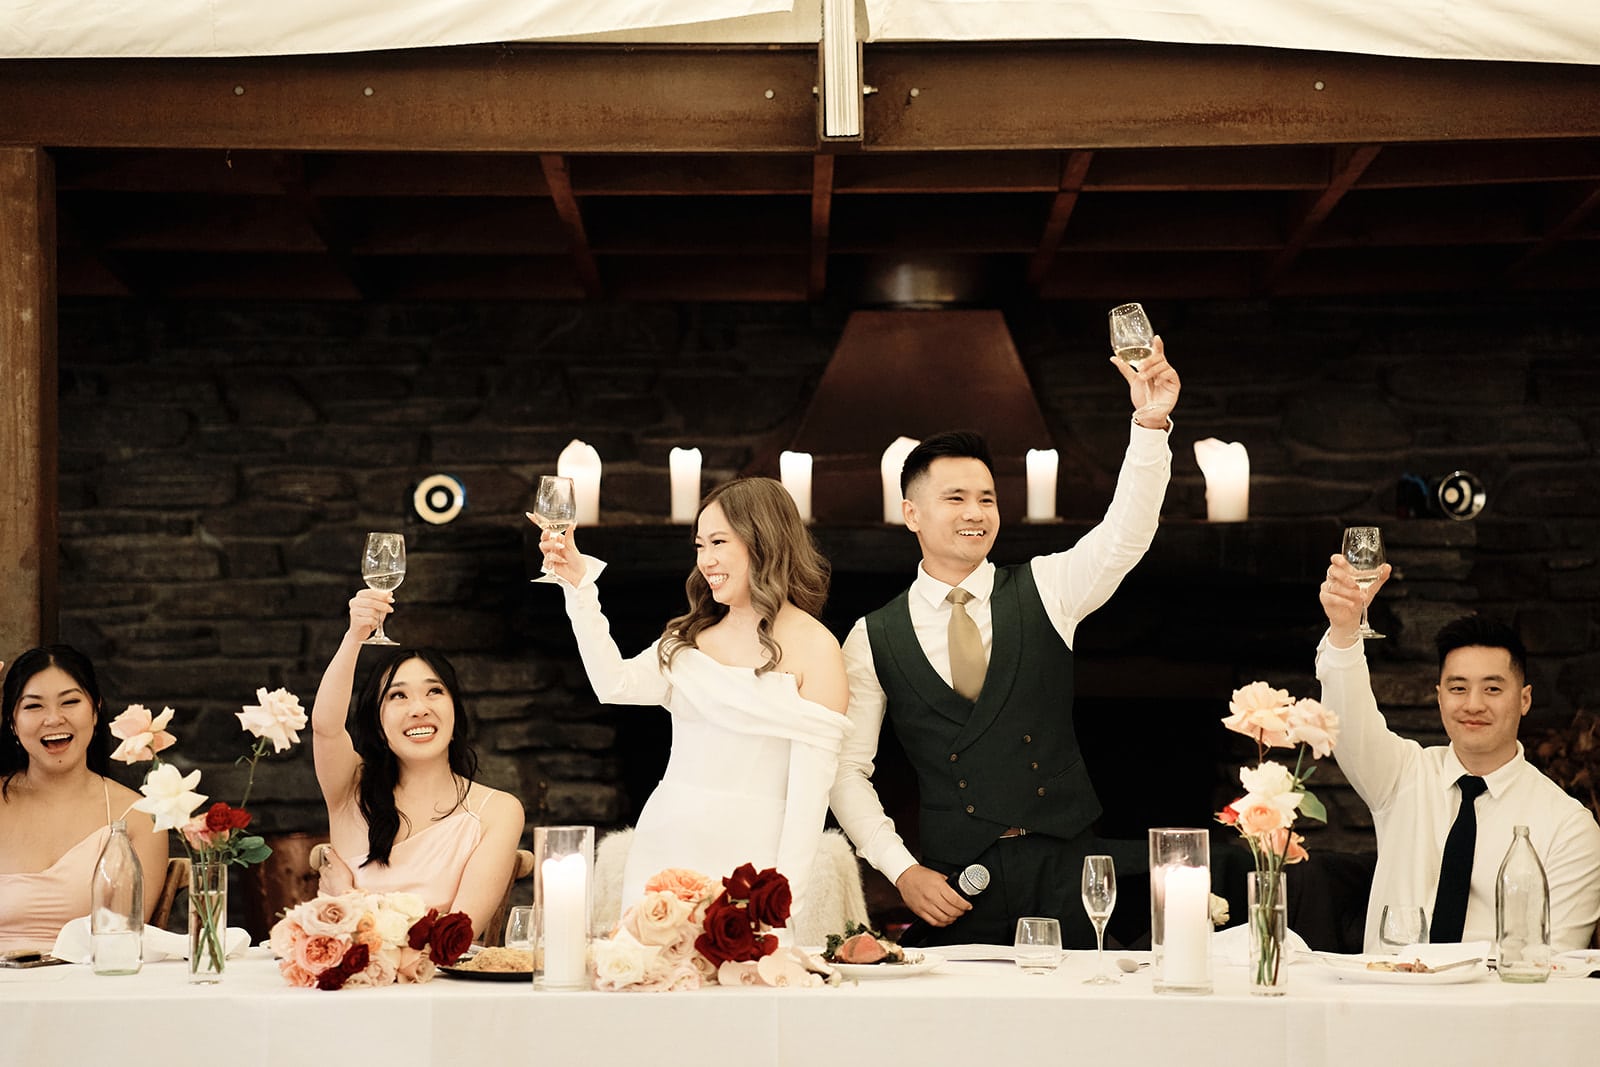 Queenstown New Zealand Elopement Wedding Photographer - Lindy and Tom, a couple in an intimate elopement wedding, raising their glasses at a table.